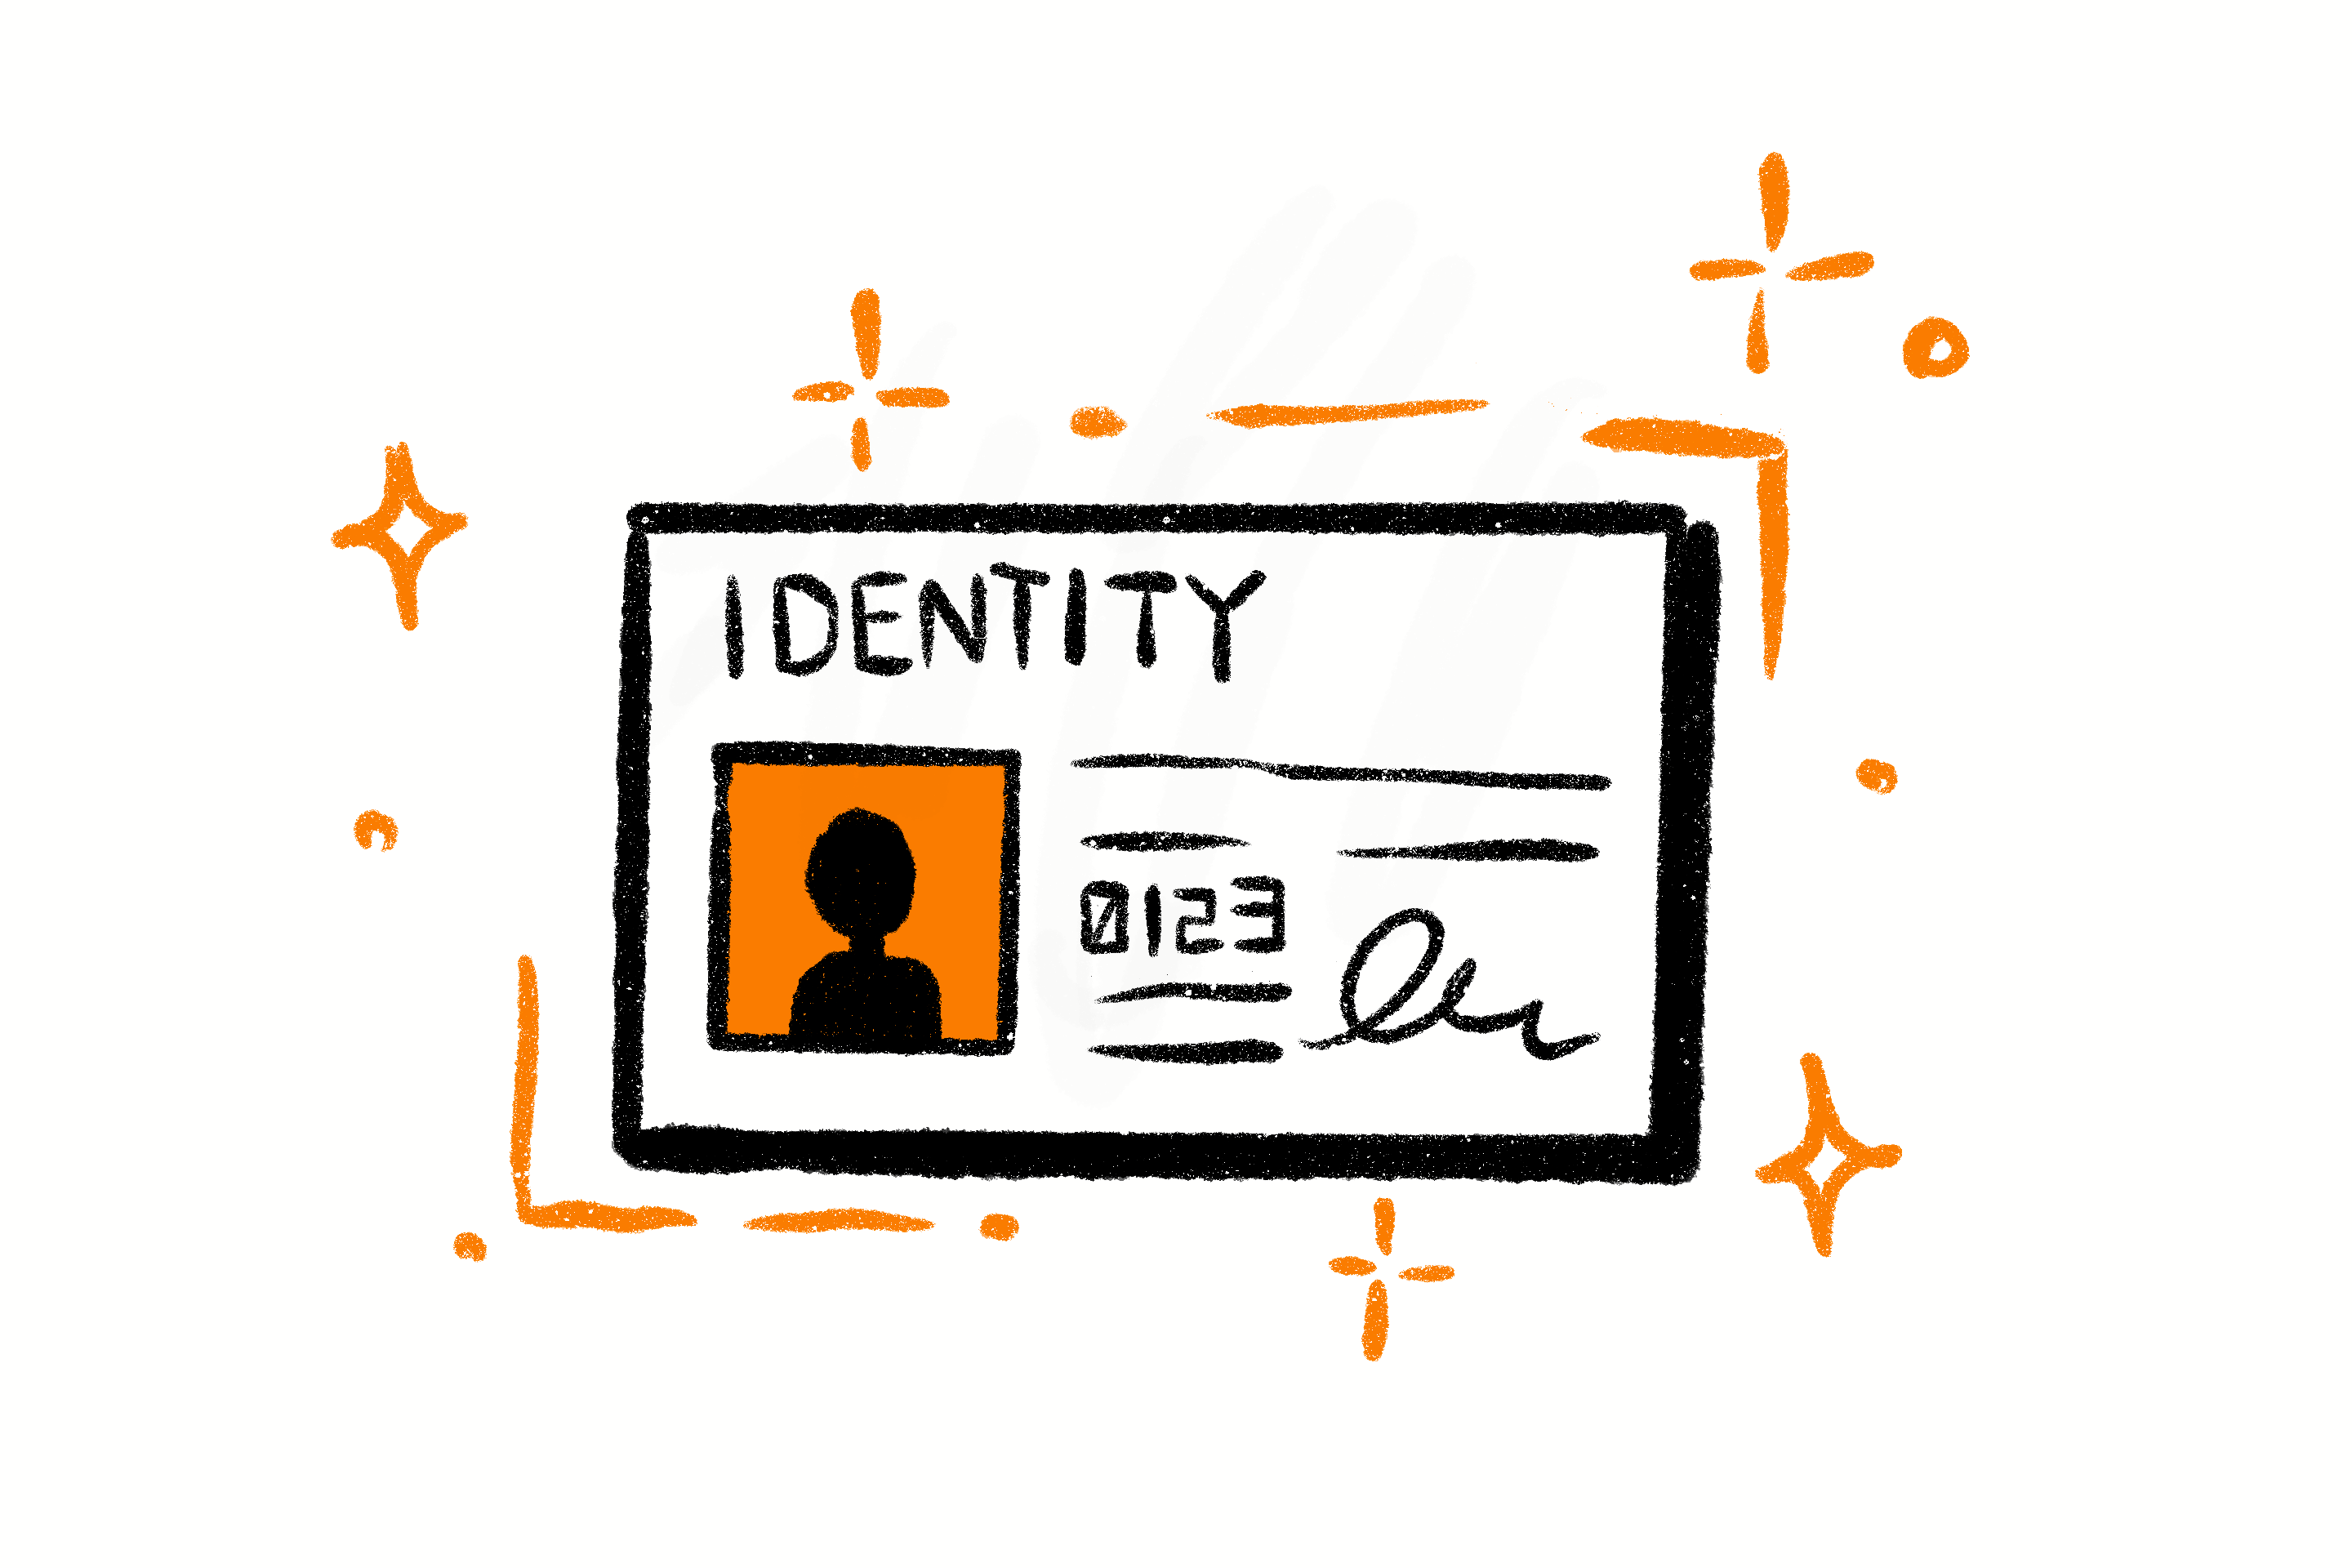 Identity card with a silhouette, the number 0123 and a signature surrounded by glints.